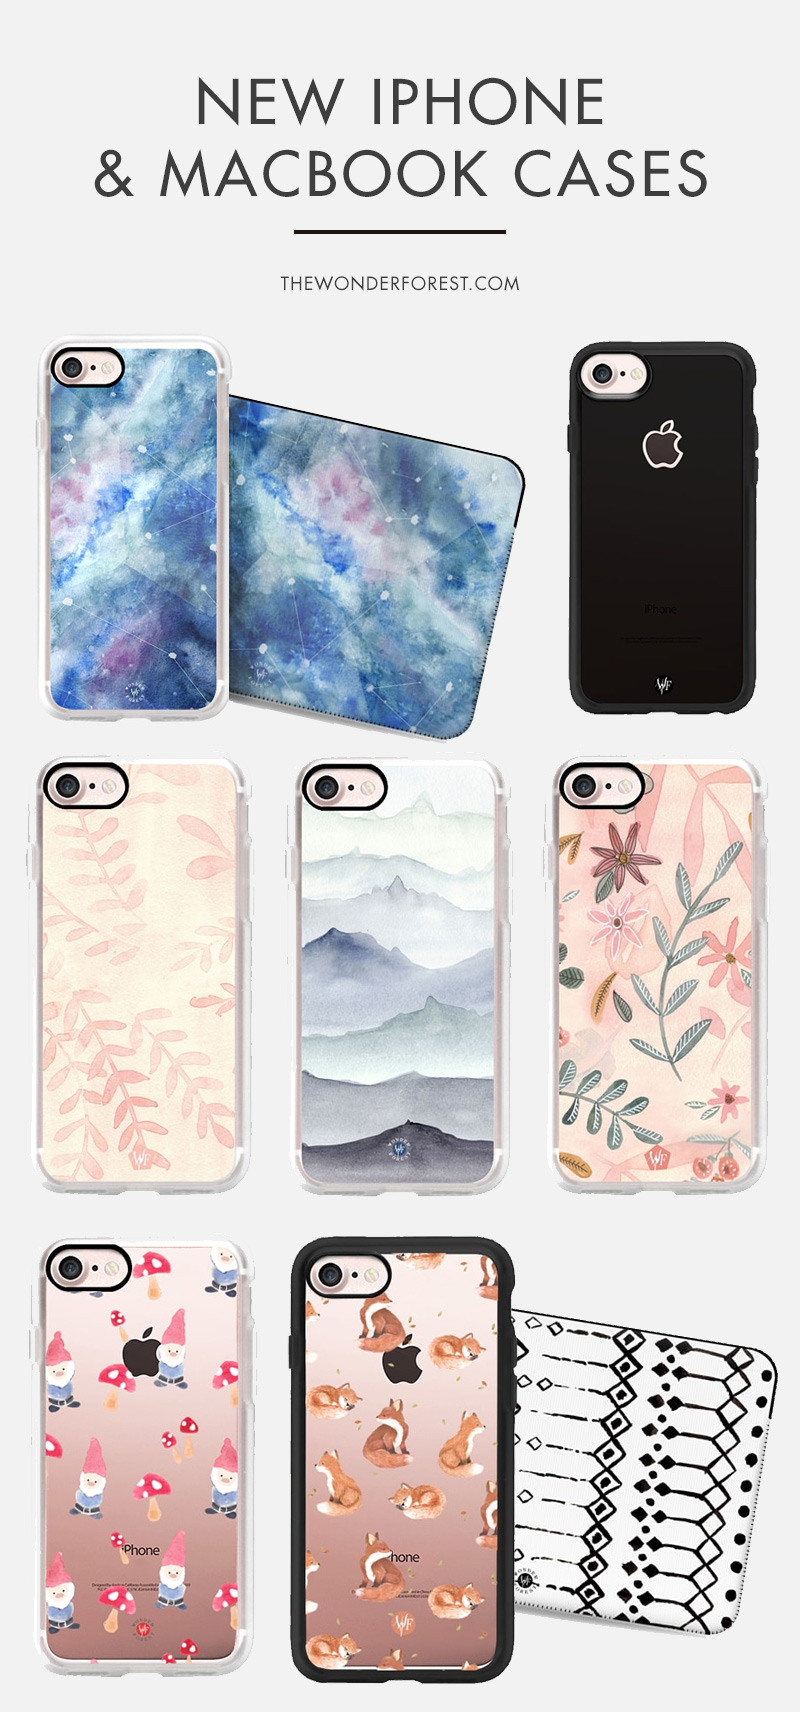 New iPhone Cases by Wonder Forest